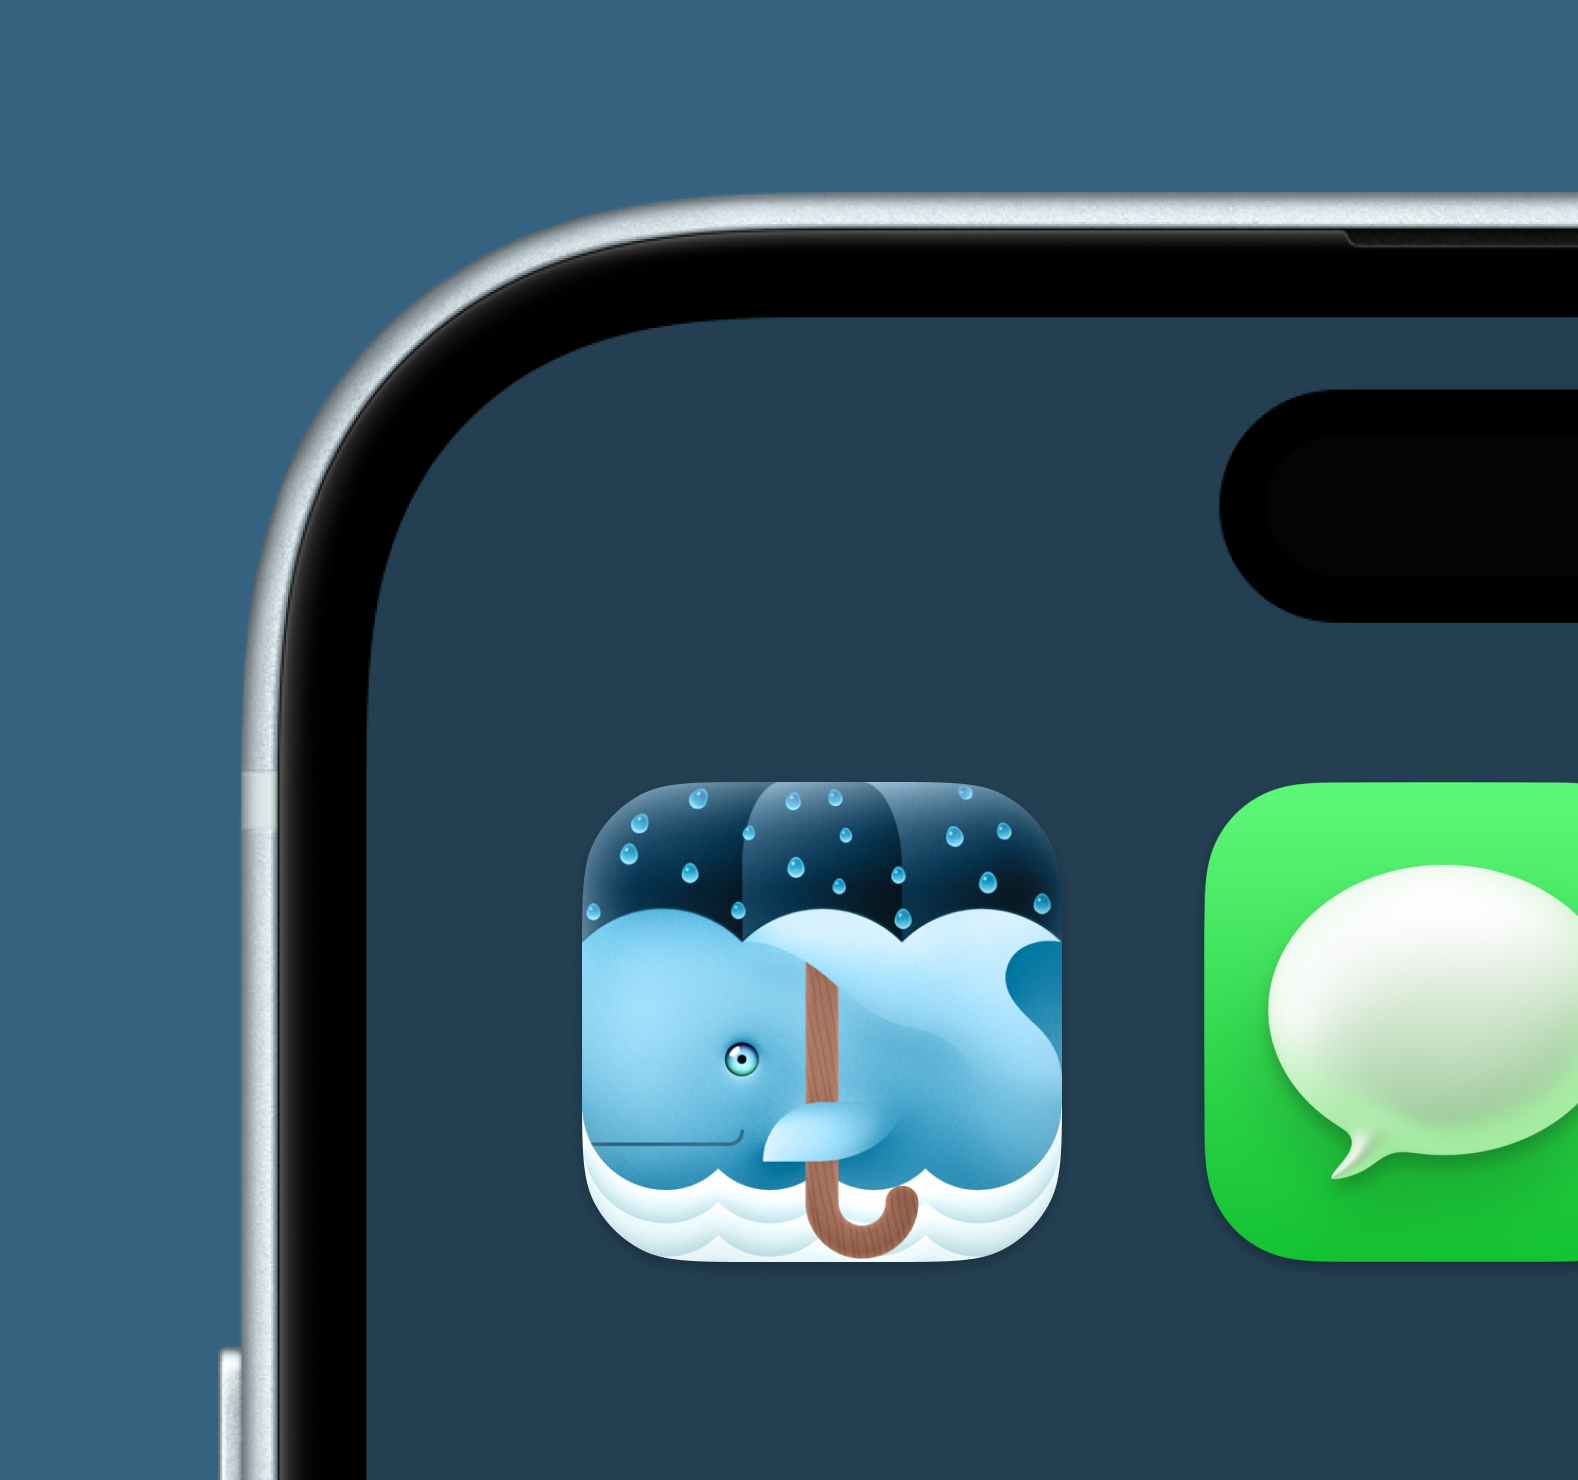 iOS version of the icon